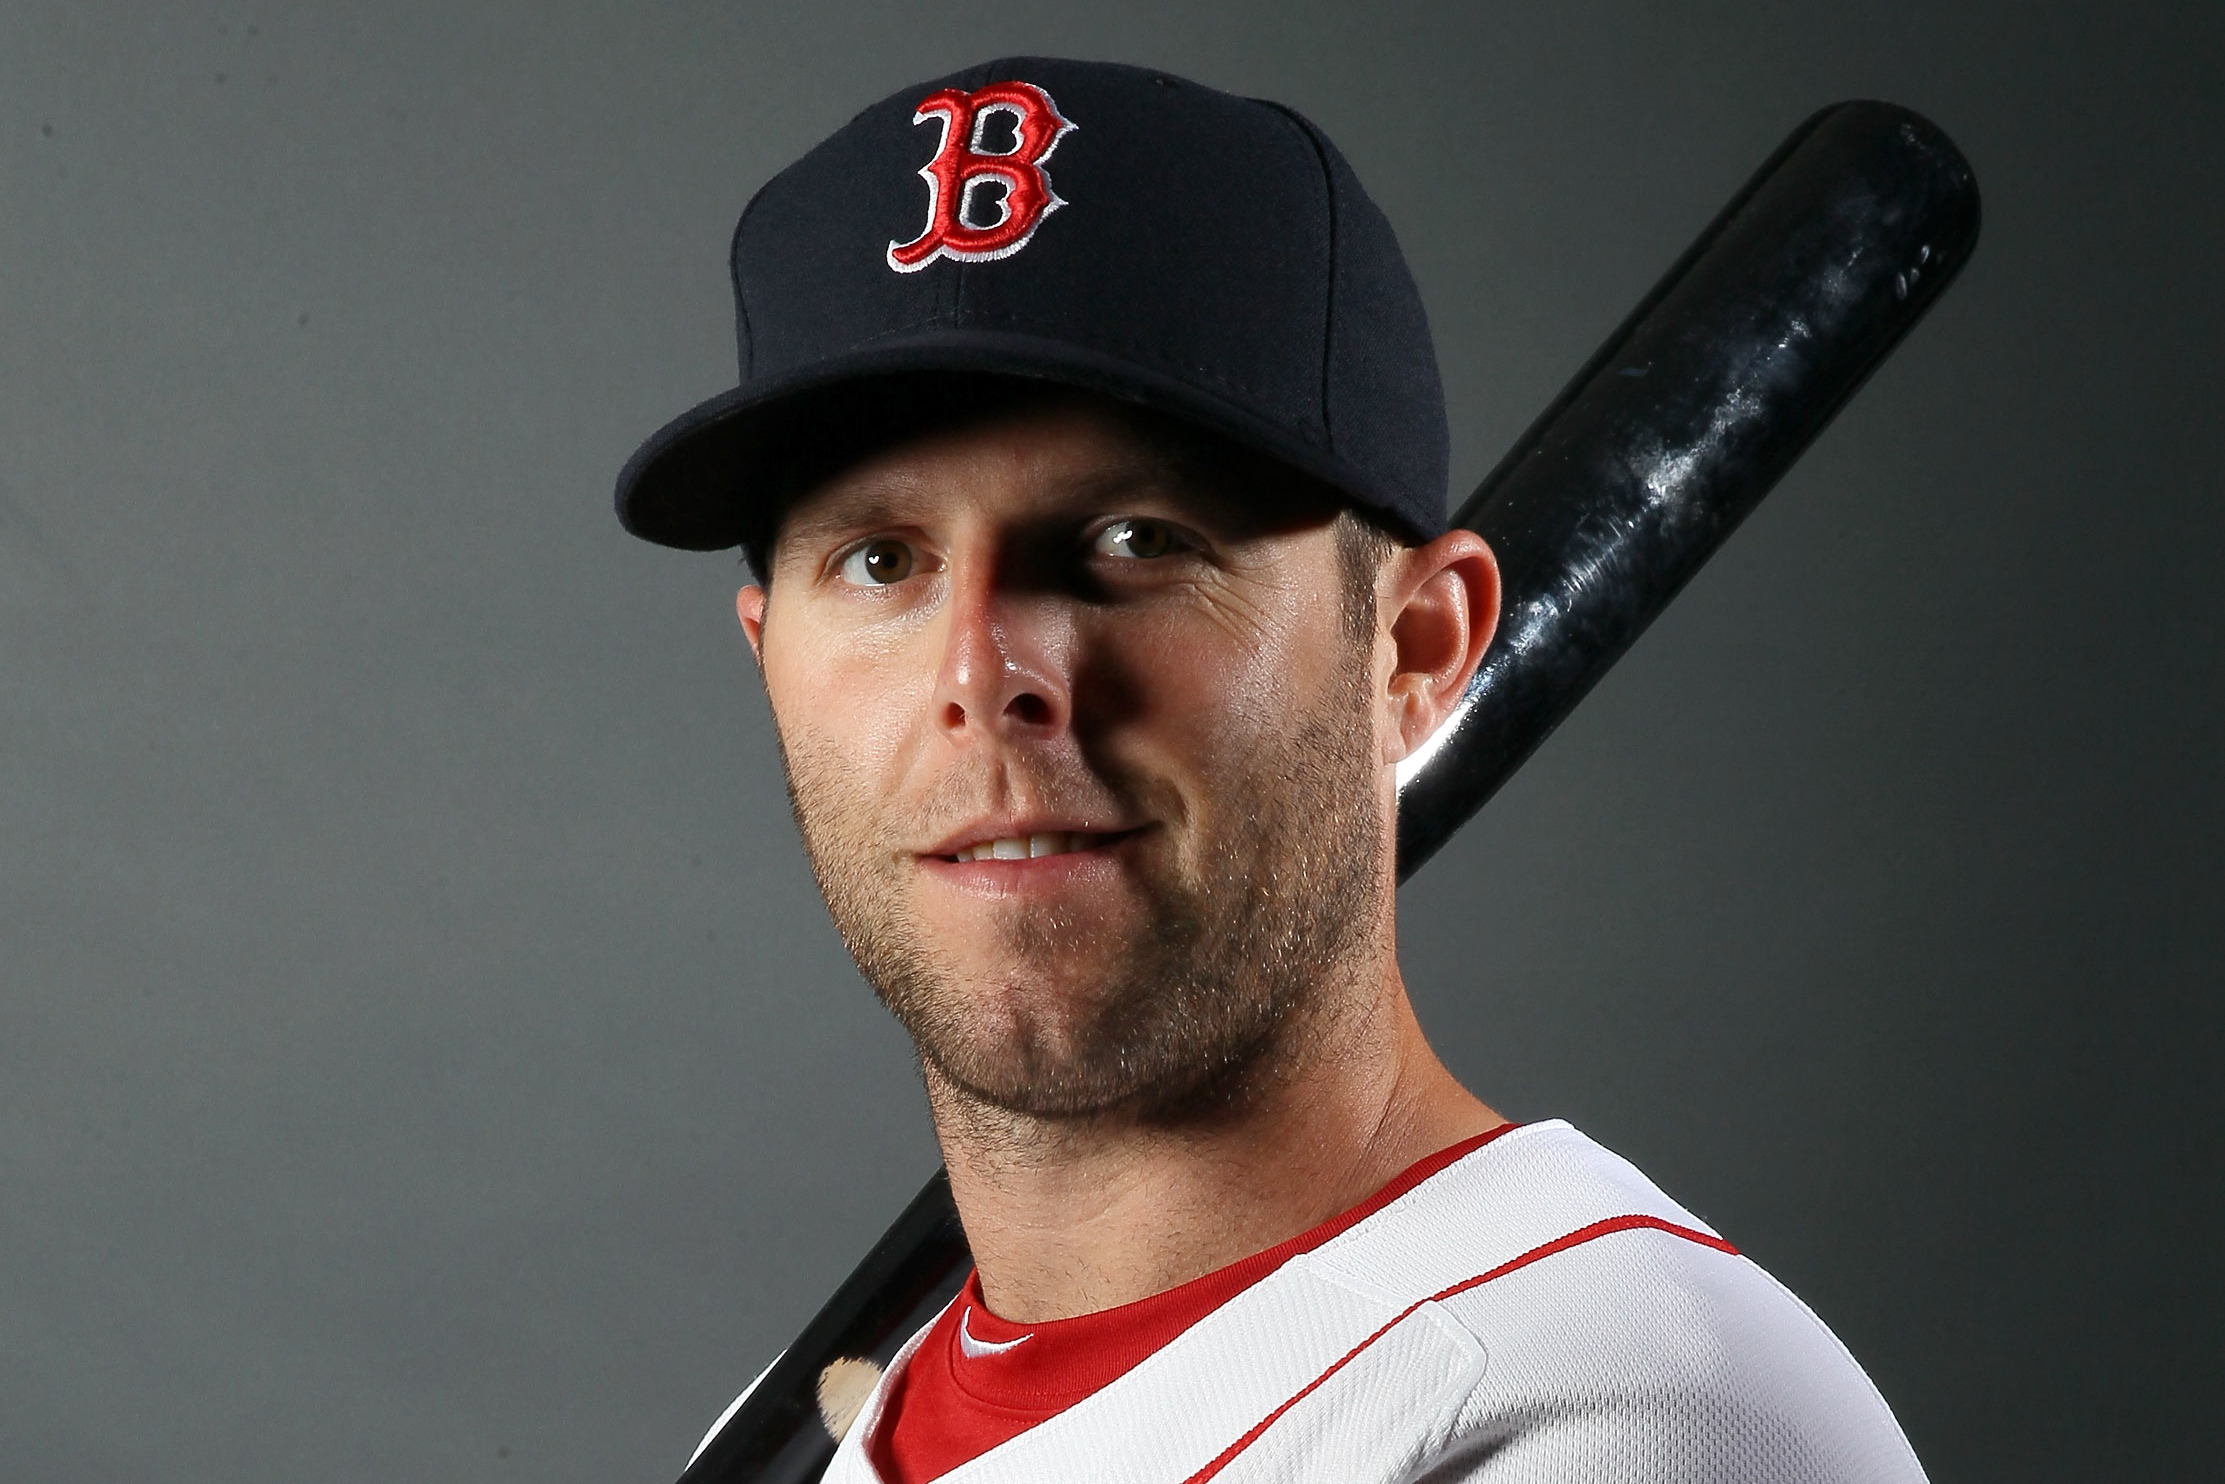 Tip your hat to Dustin Pedroia